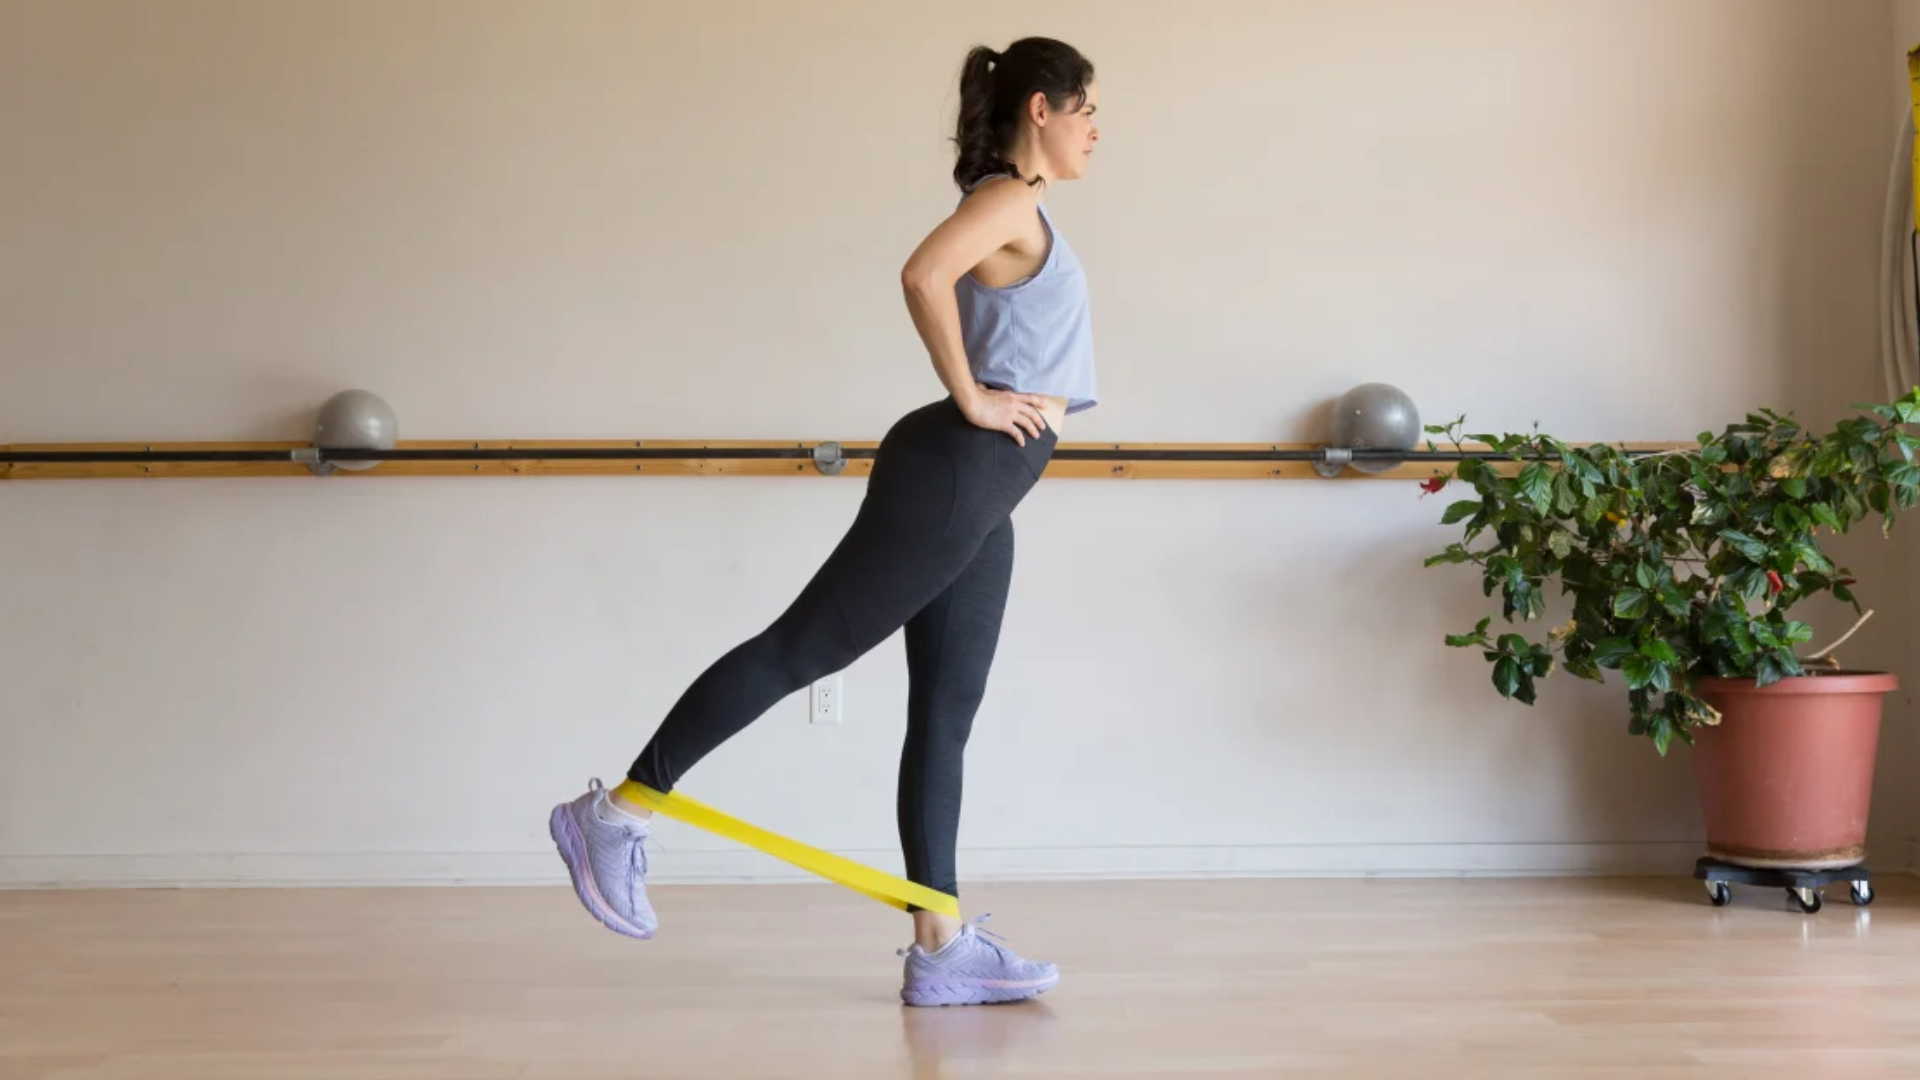 Standing Hip Flexion Exercise for Strength and Flexibility